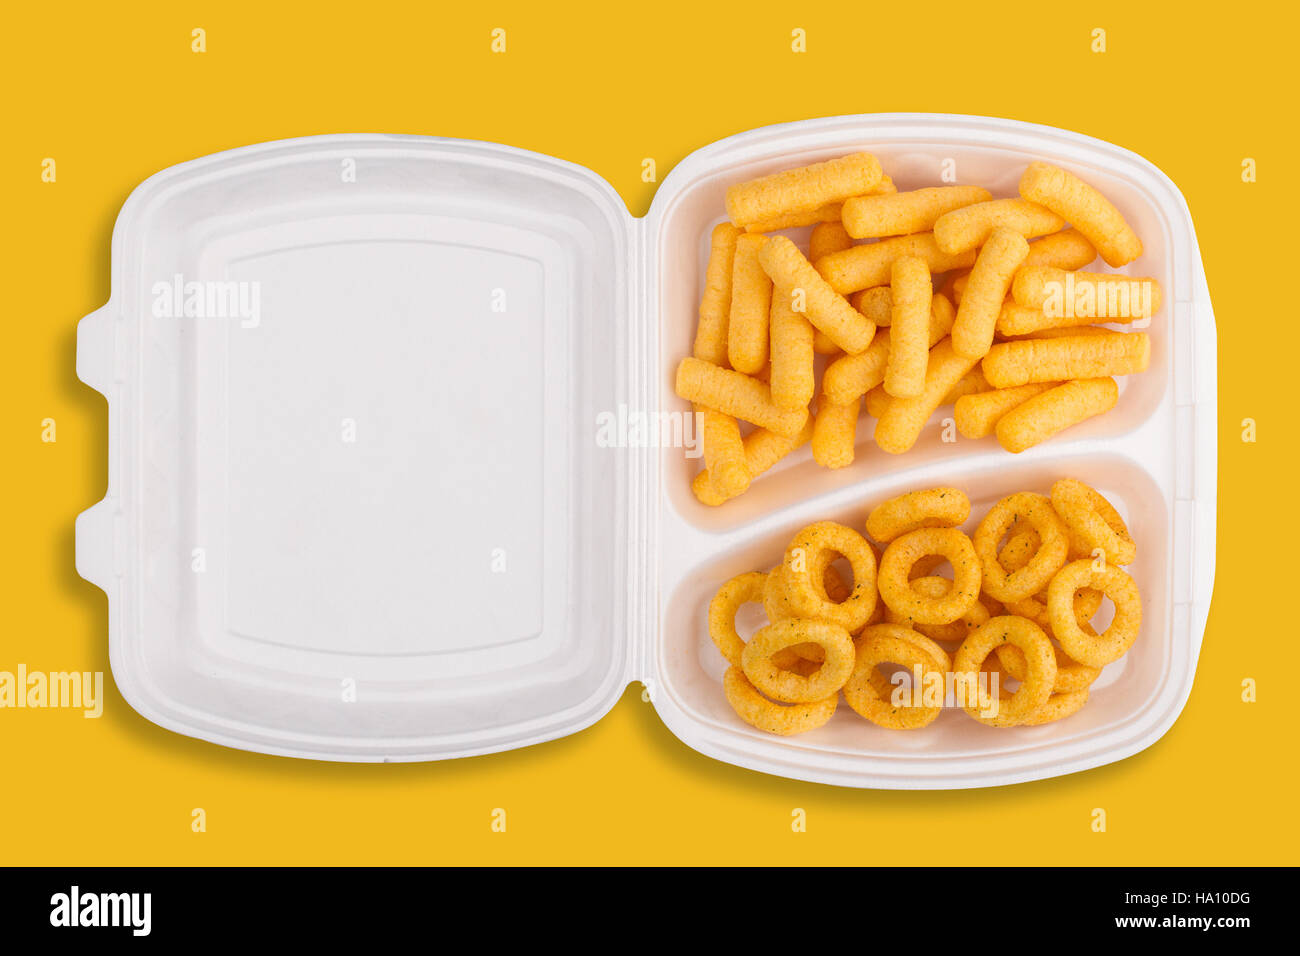 Cardboard Box with Polystyrene Chips Stock Image - Image of goods, open:  64041391